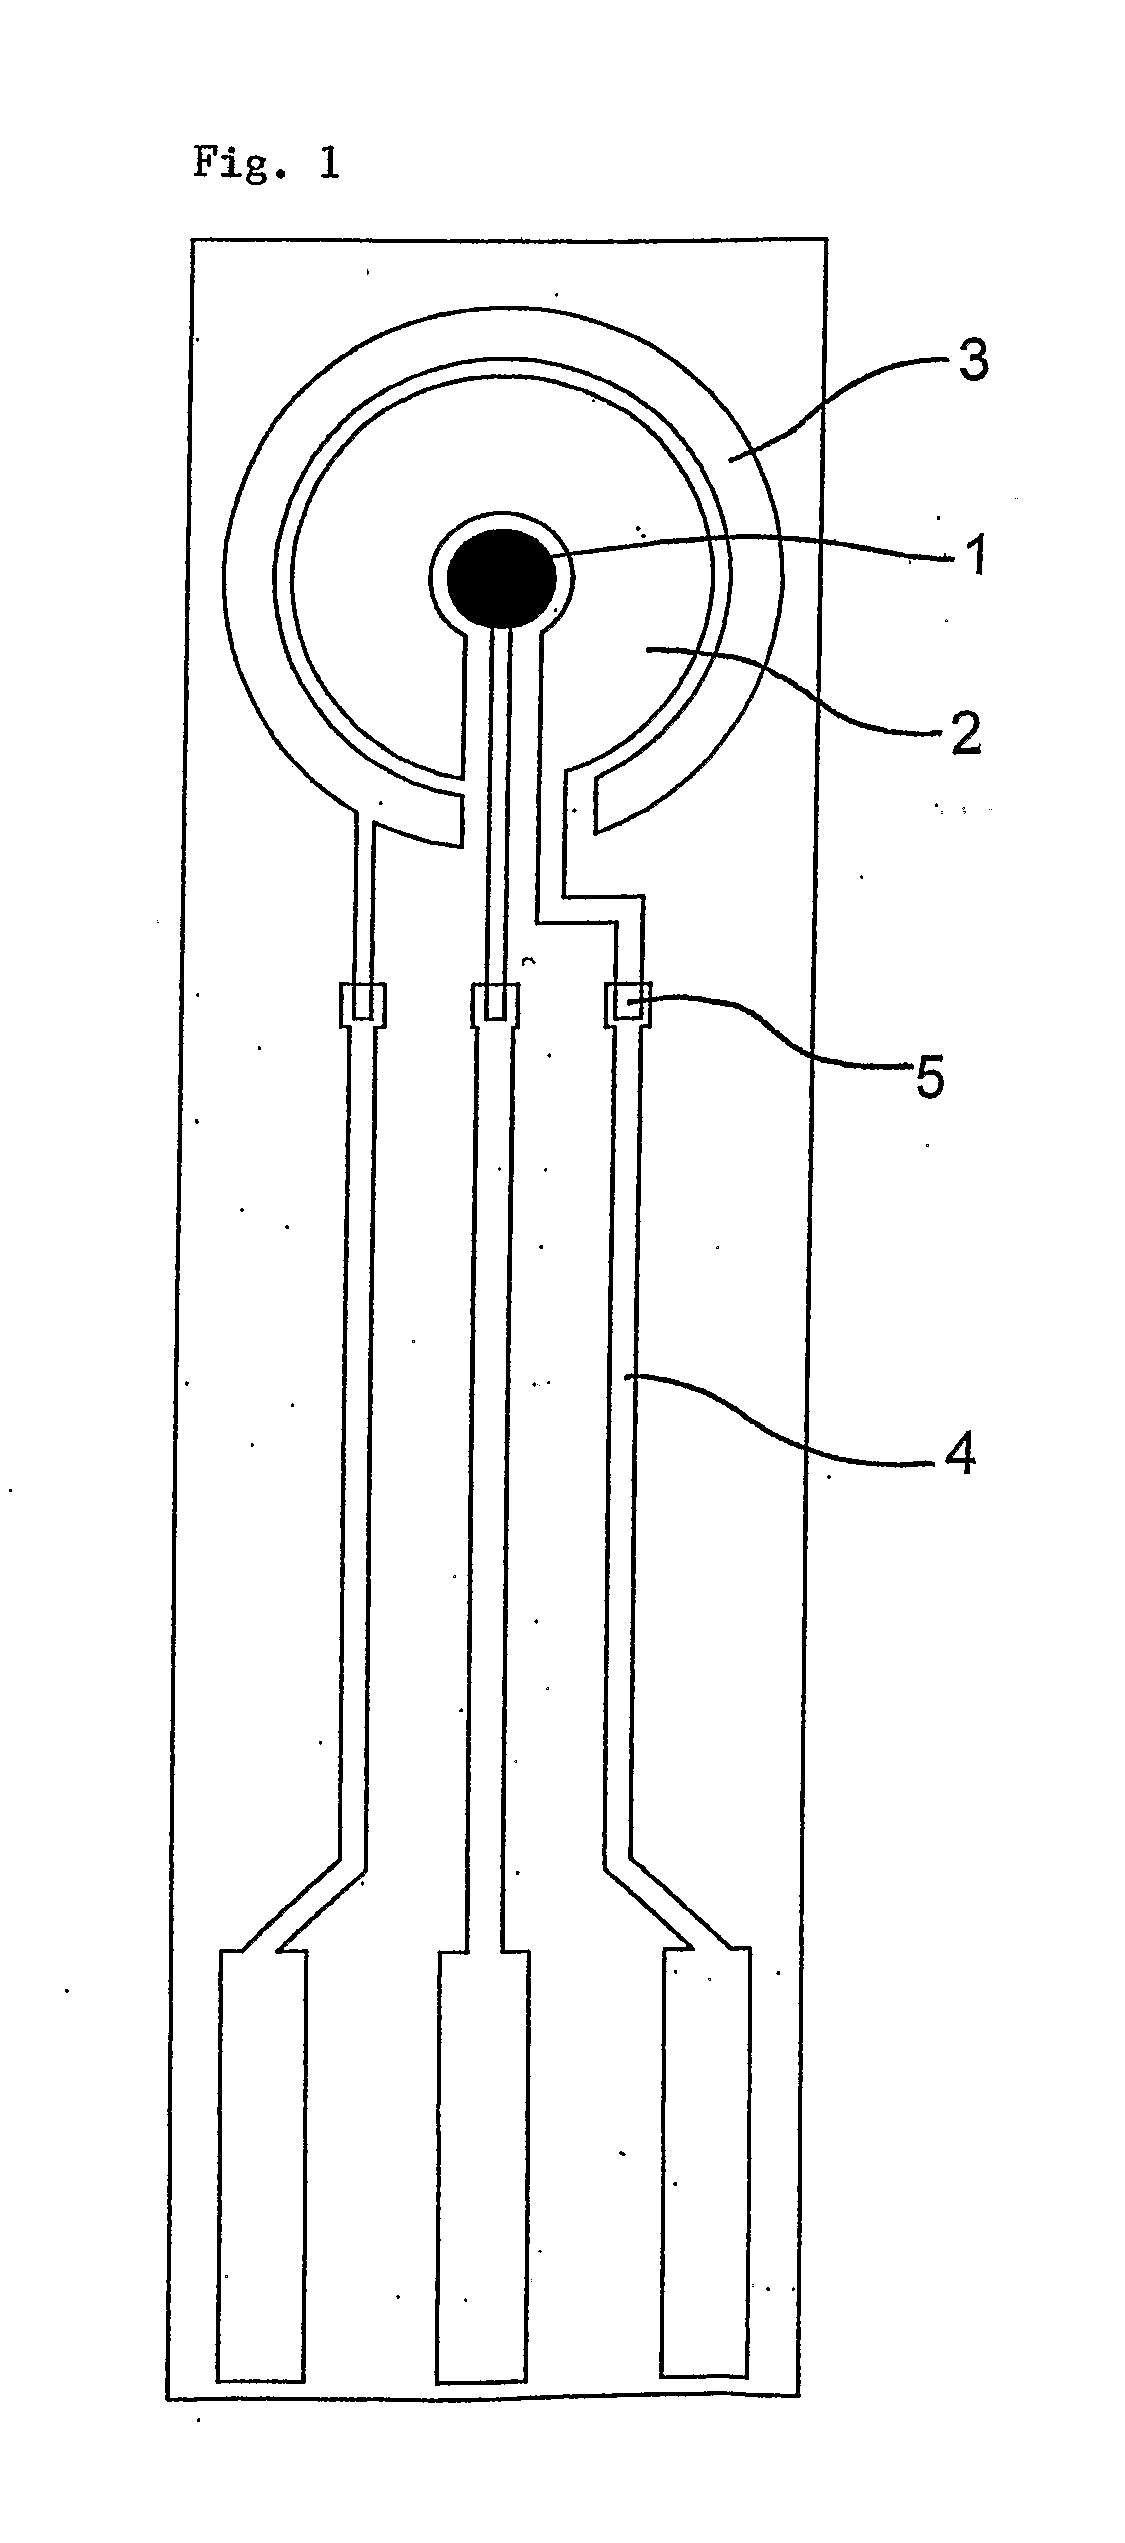 Nanostructured Working Electrode of an Electrochemical Sensor, Method of Manufacturing Thereof and Sensor Containing This Working Electrode